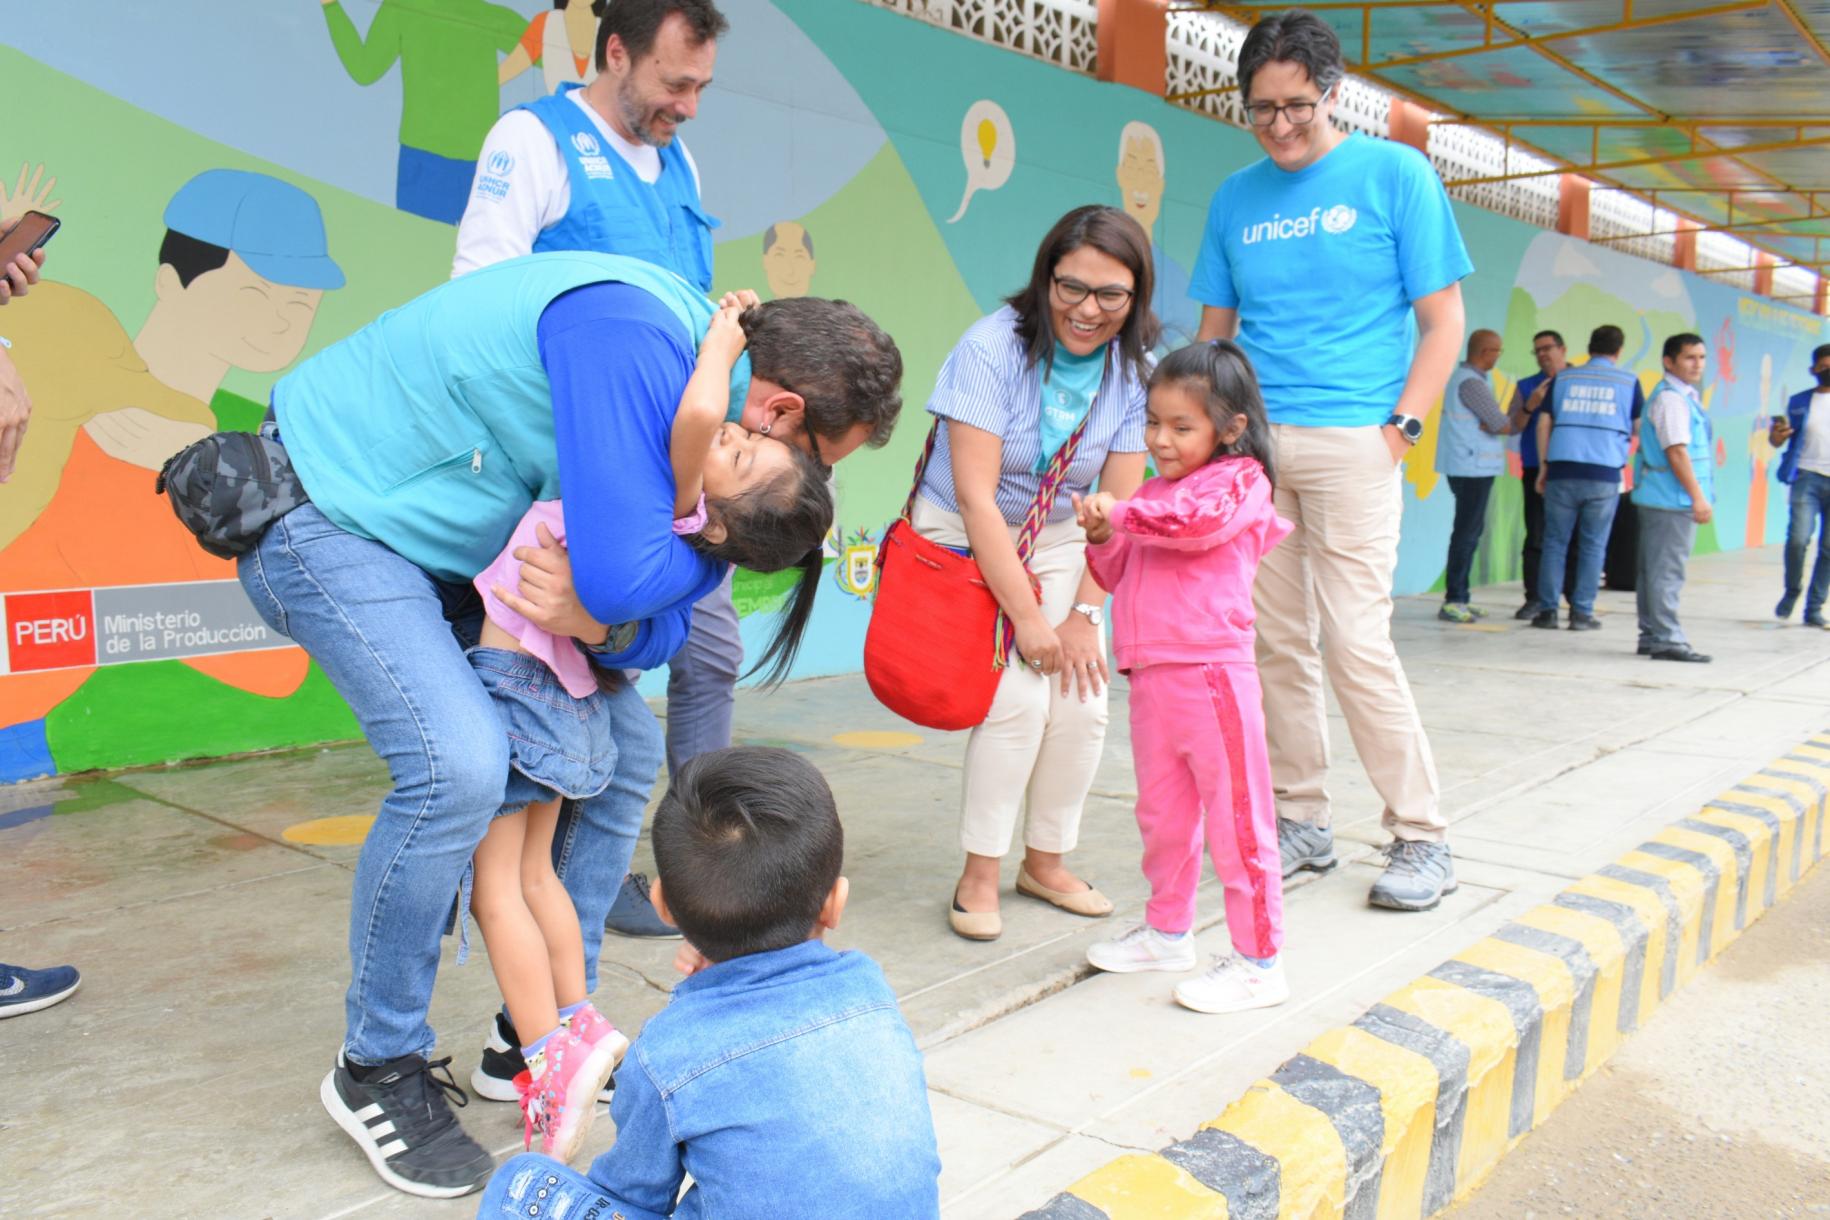 United Nations representatives in Peru and Ecuador interact with Venezuelan children being assisted at the attention and orientation points for migrant and refugee populations in Tumbes, a city located on the border between Peru and Ecuador.